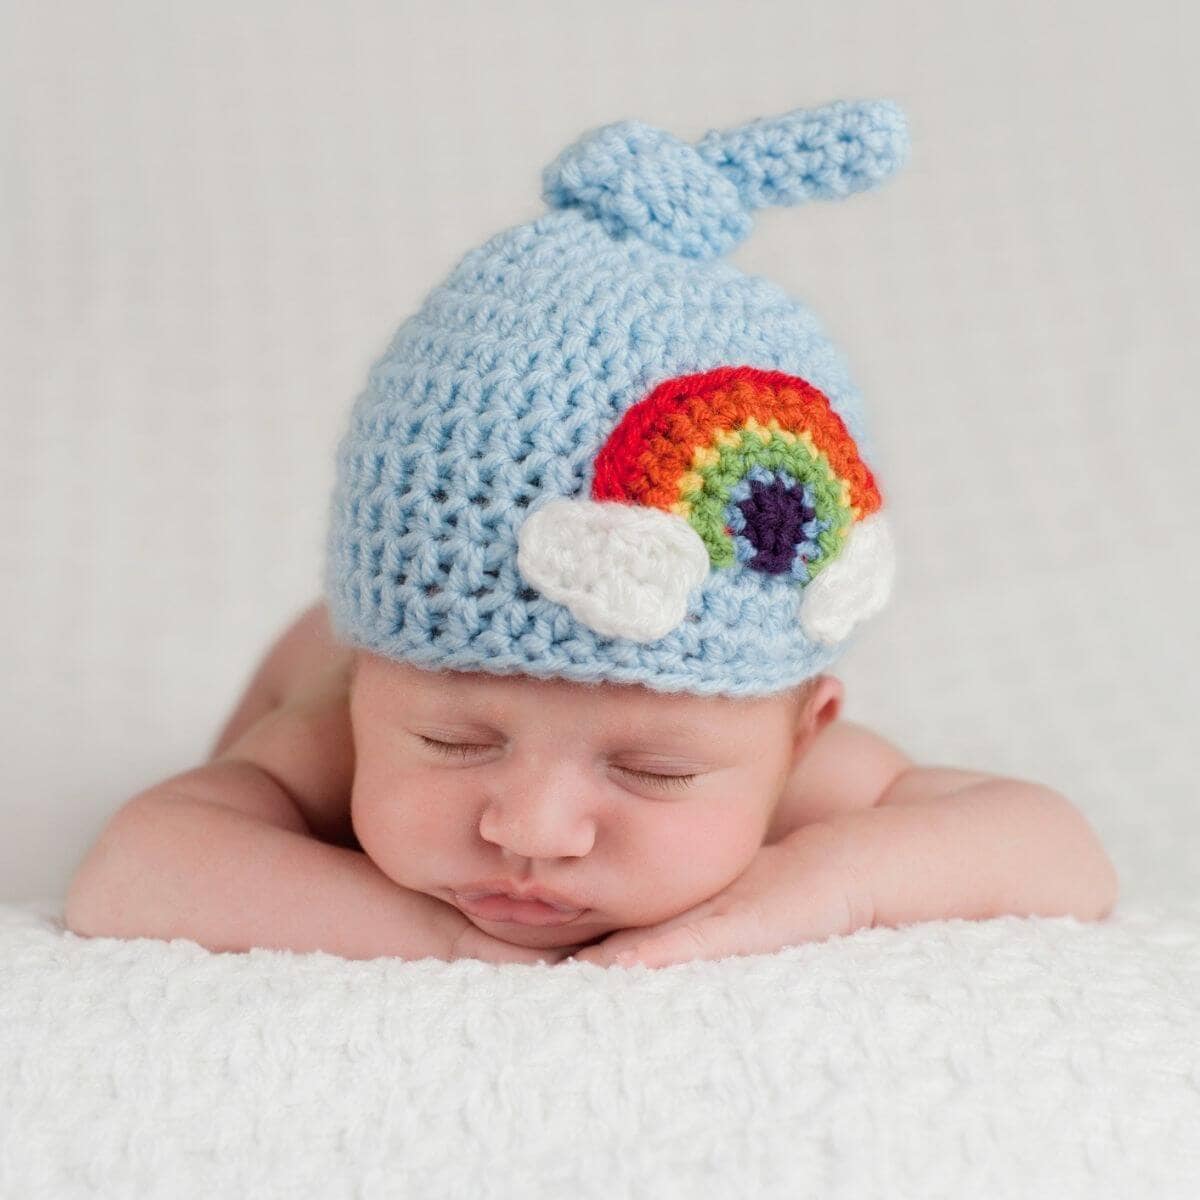 newborn baby lying with its chin on its hands wearing a blue knit hat with a rainbow on it